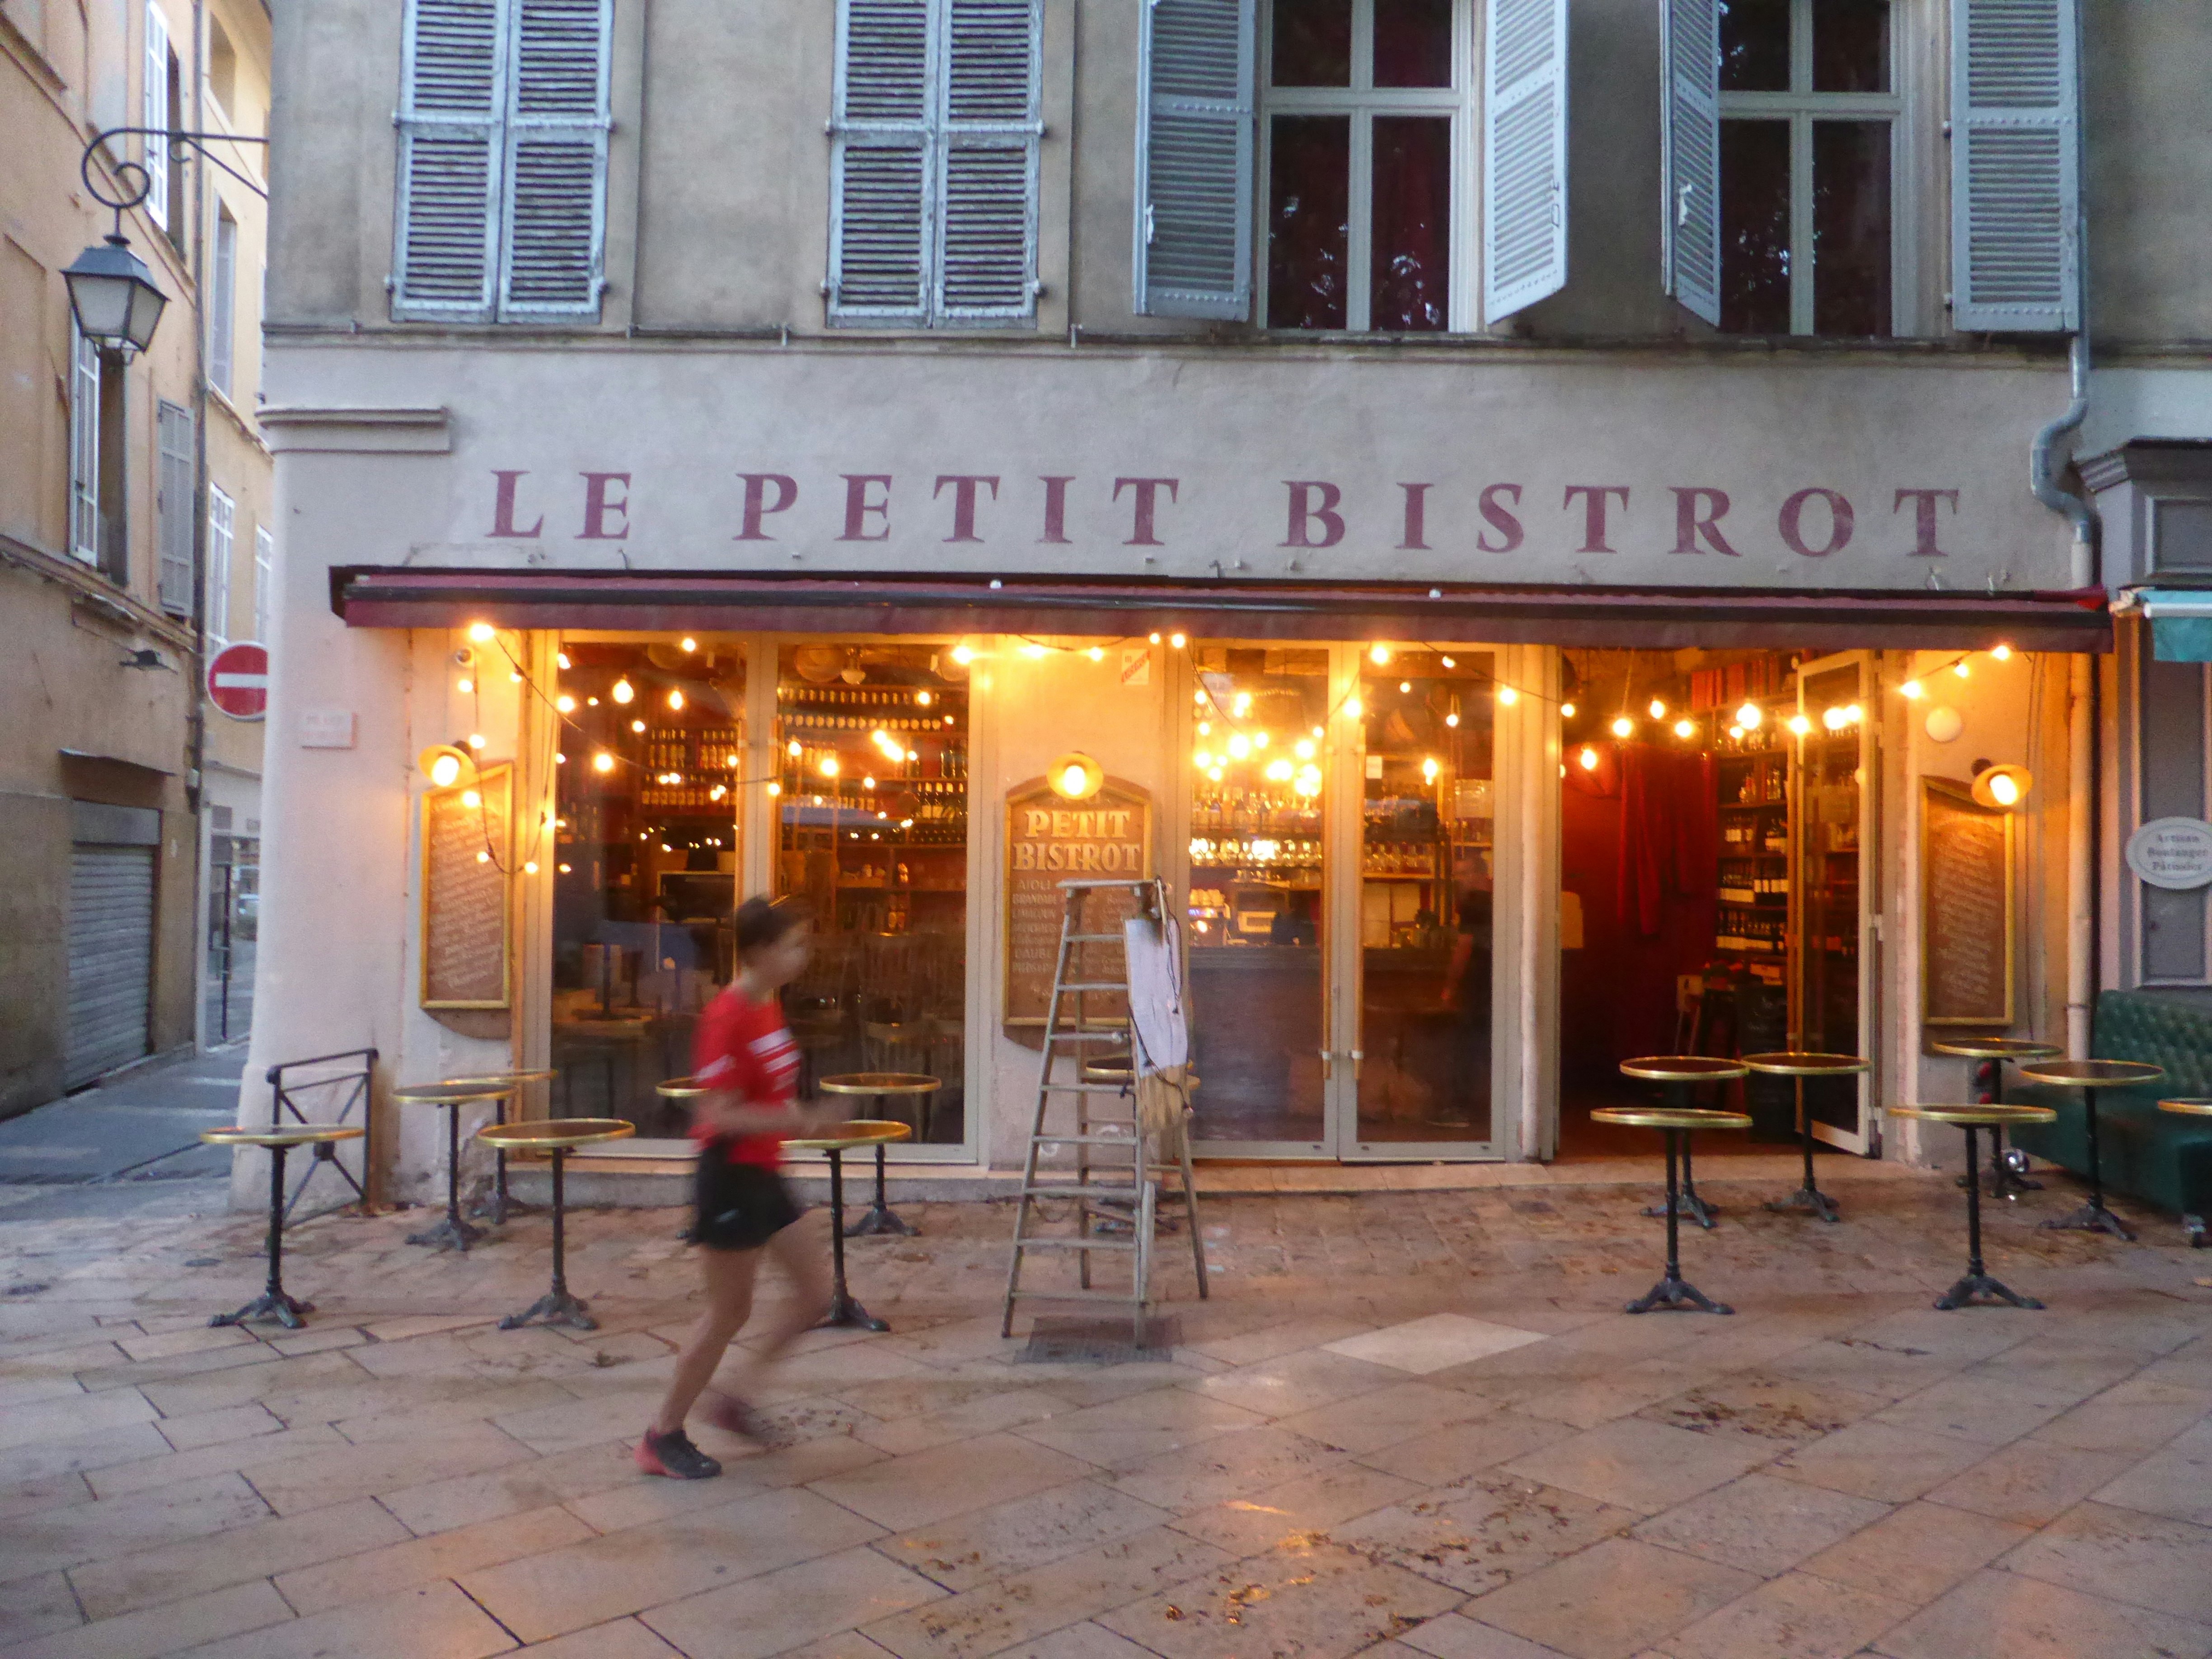 The writer is blurred as she runs past Le Petite Bistrot in Aix-en-Provence.